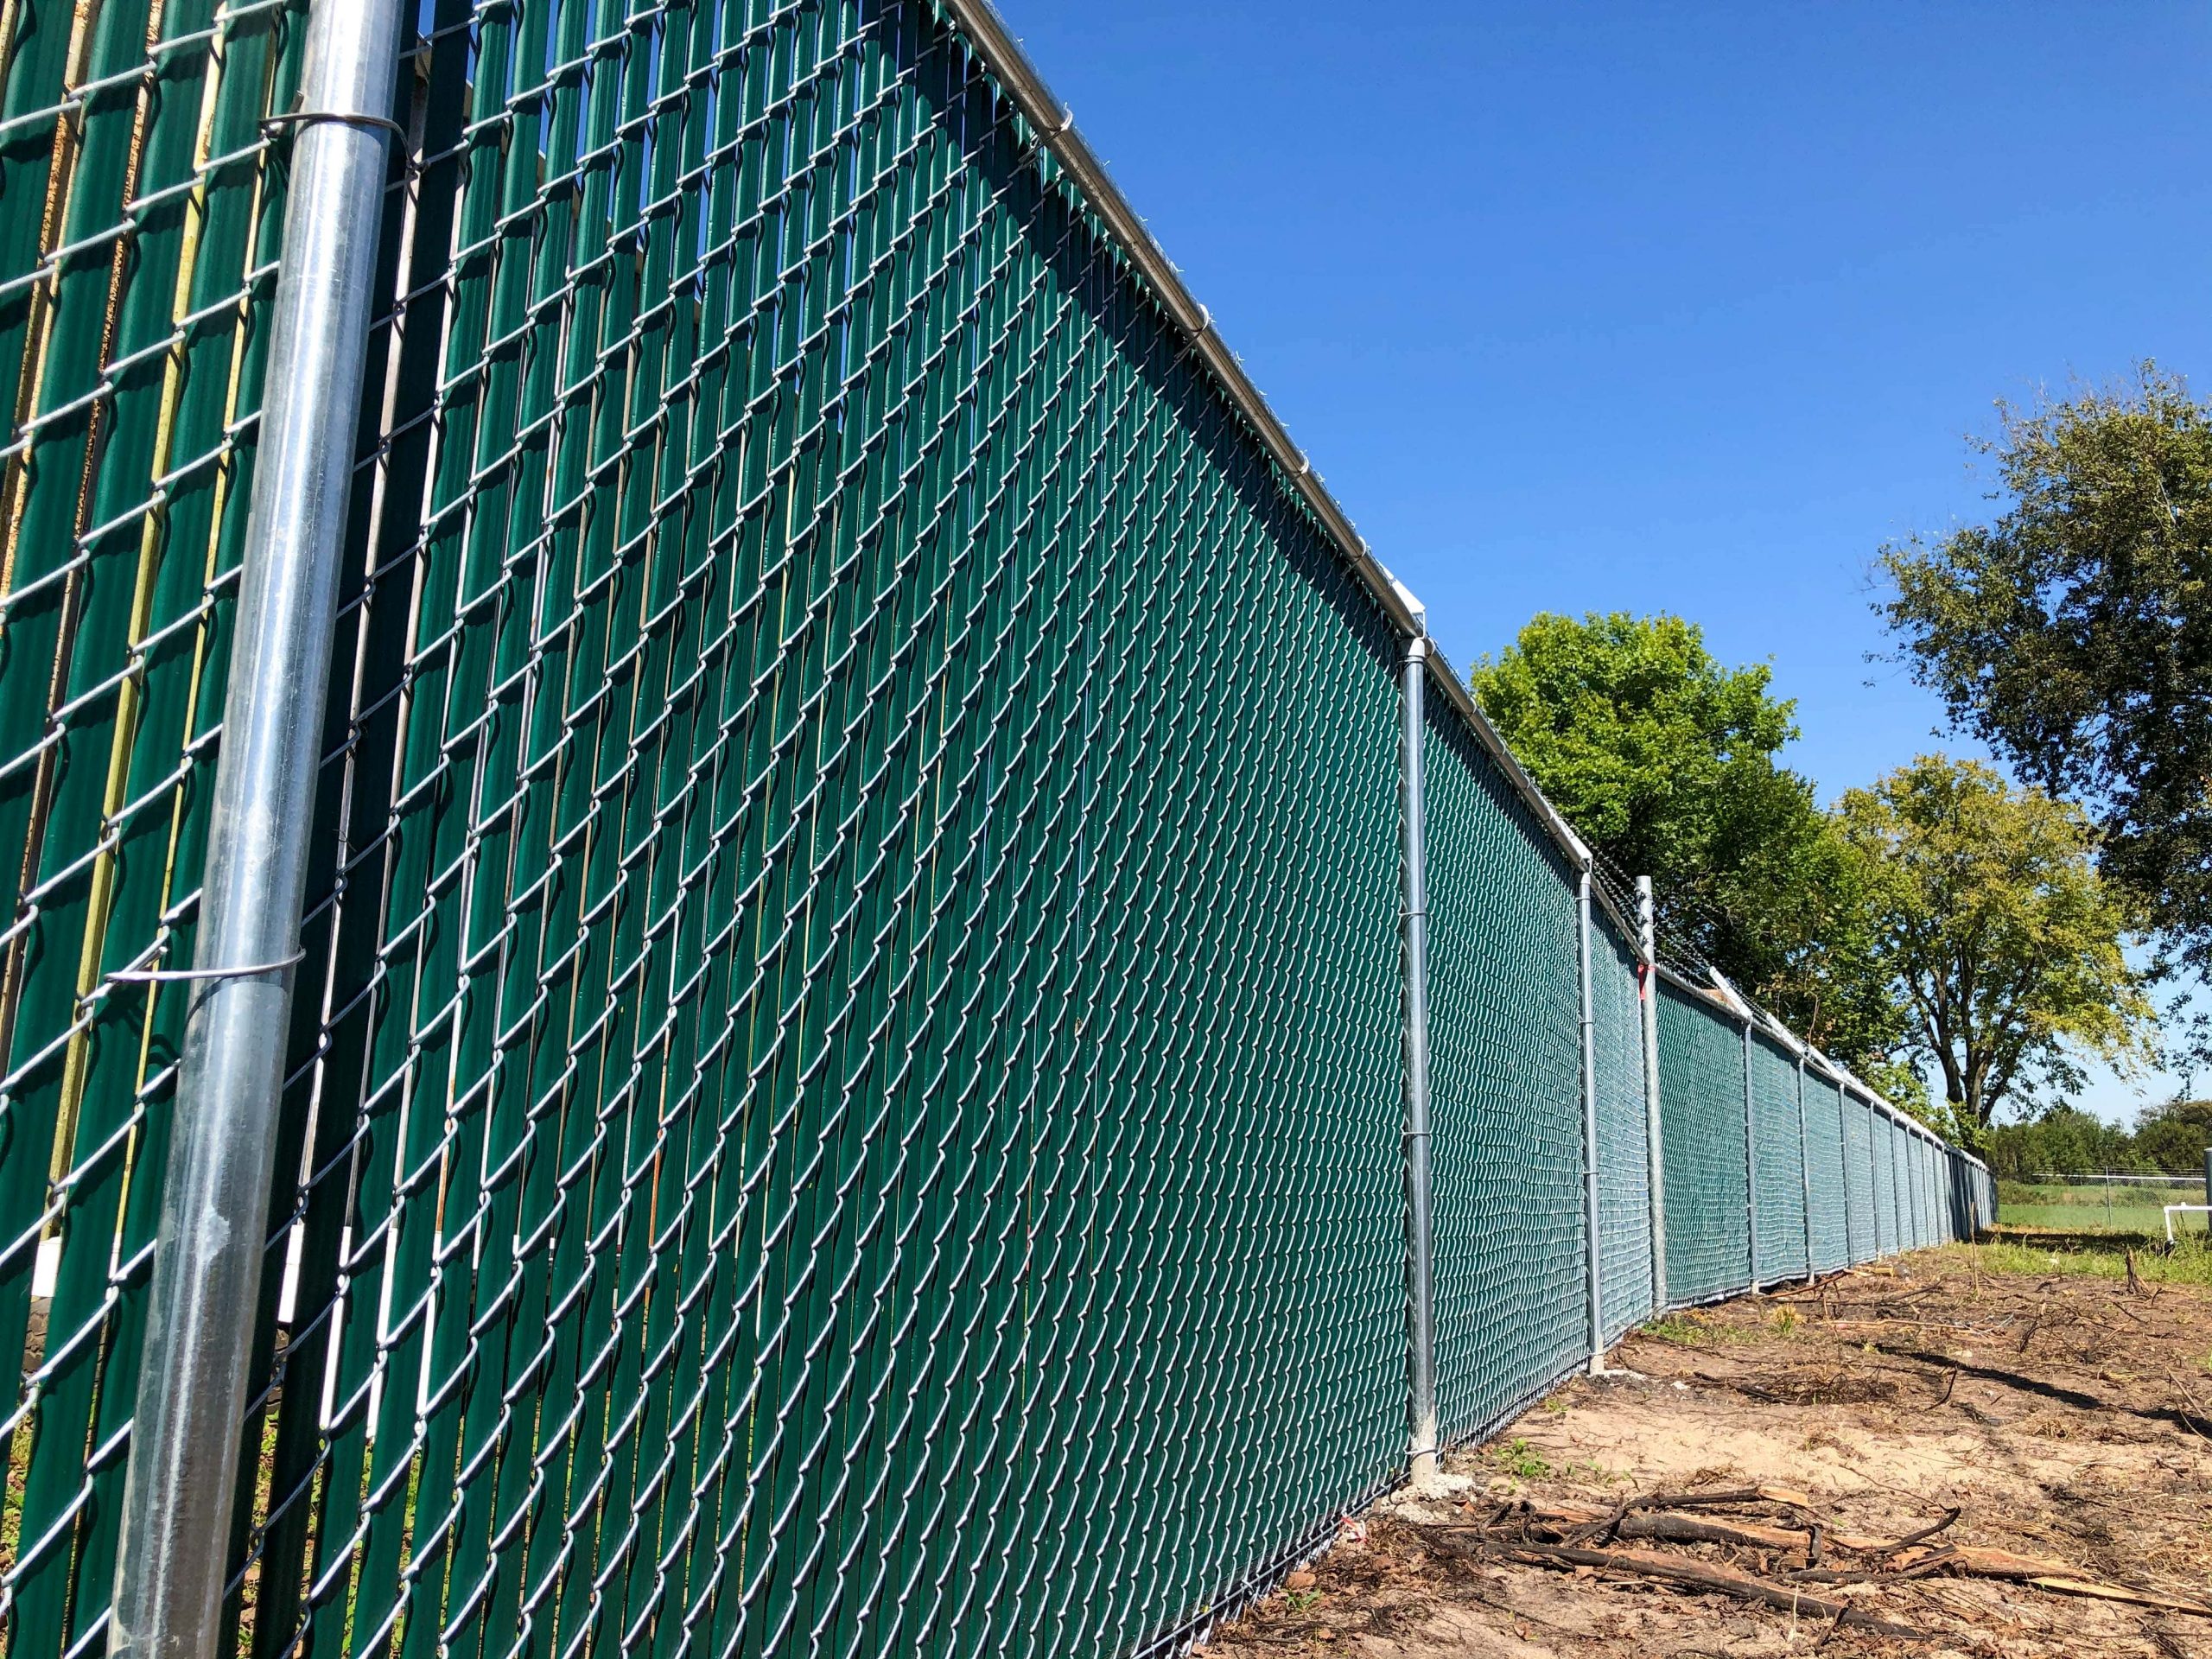 COMMERCIAL FENCE REPLACEMENT